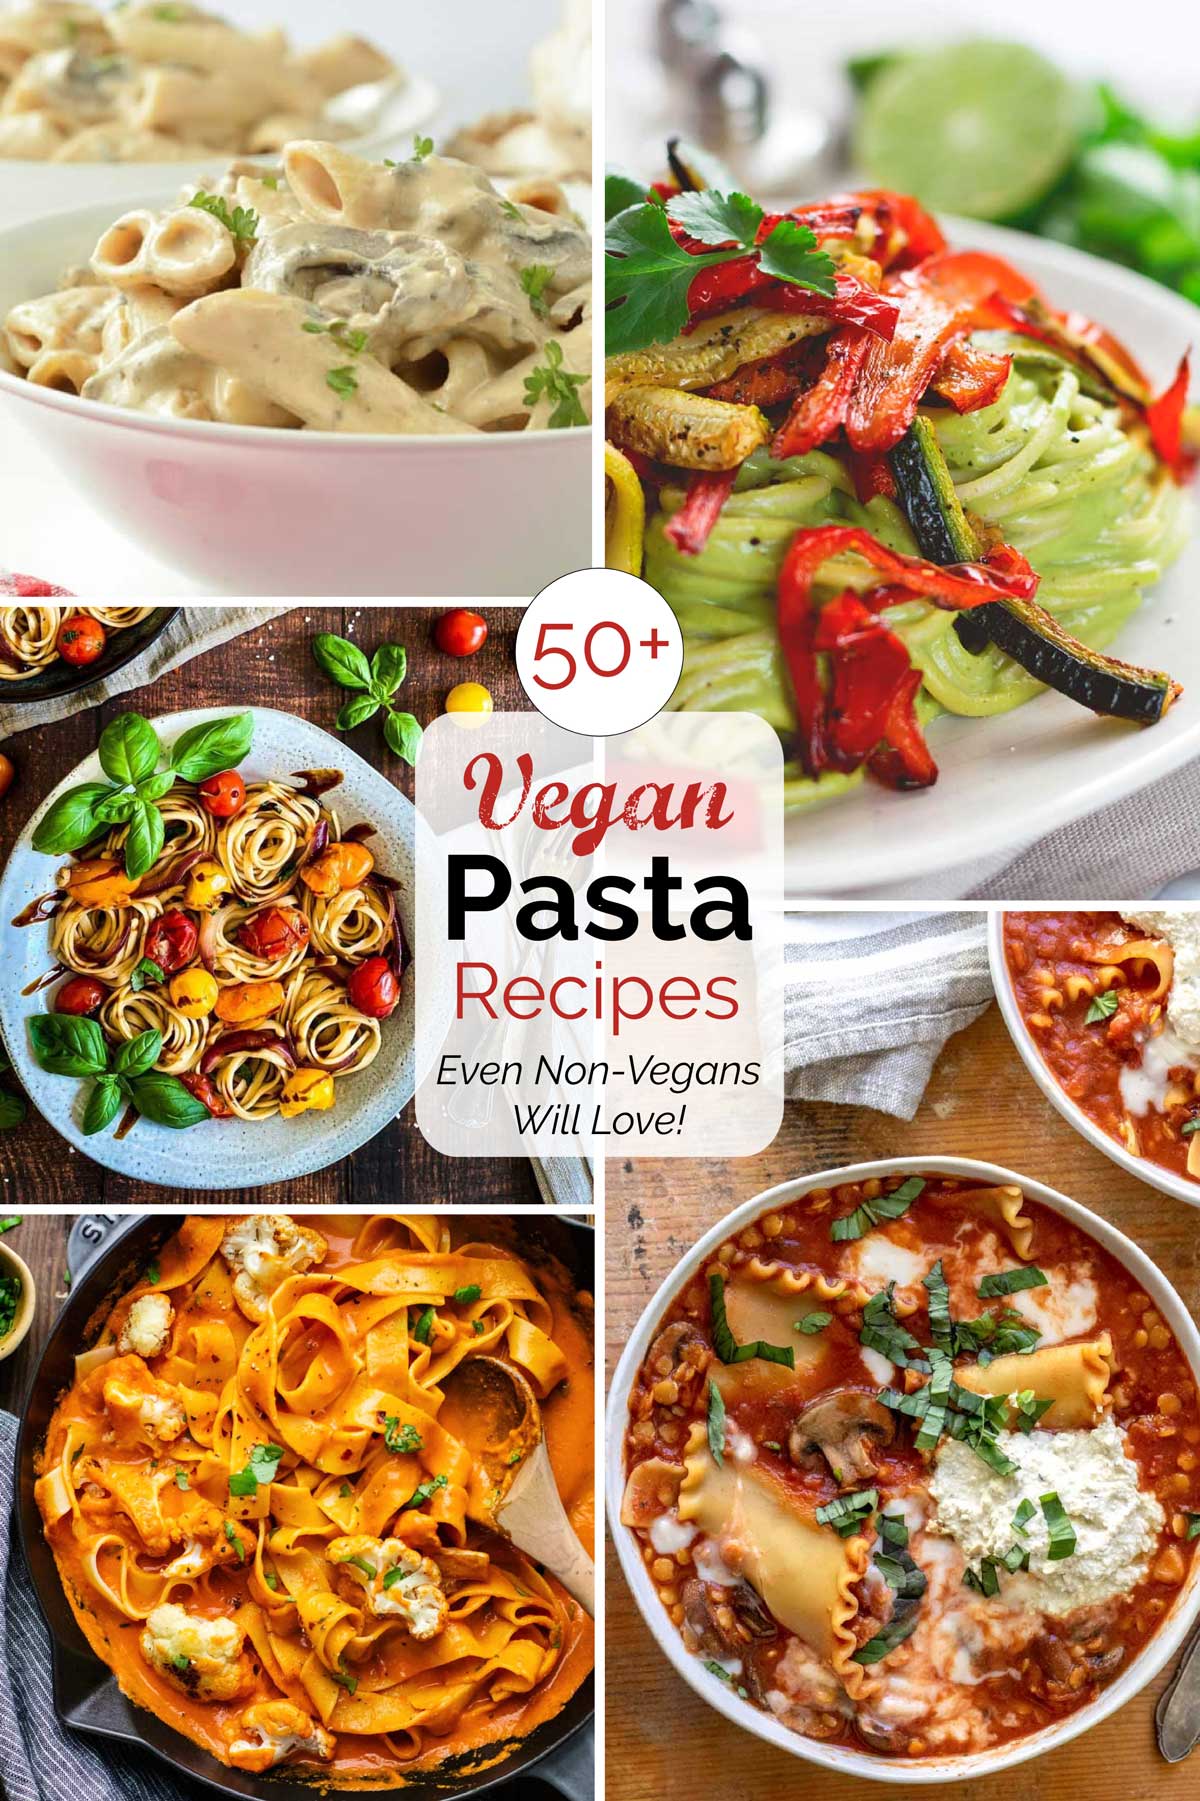 Collage of 5 recipe photos with centered text box "50+ Vegan Pasta Recipes Even Non-Vegans Will Love!".